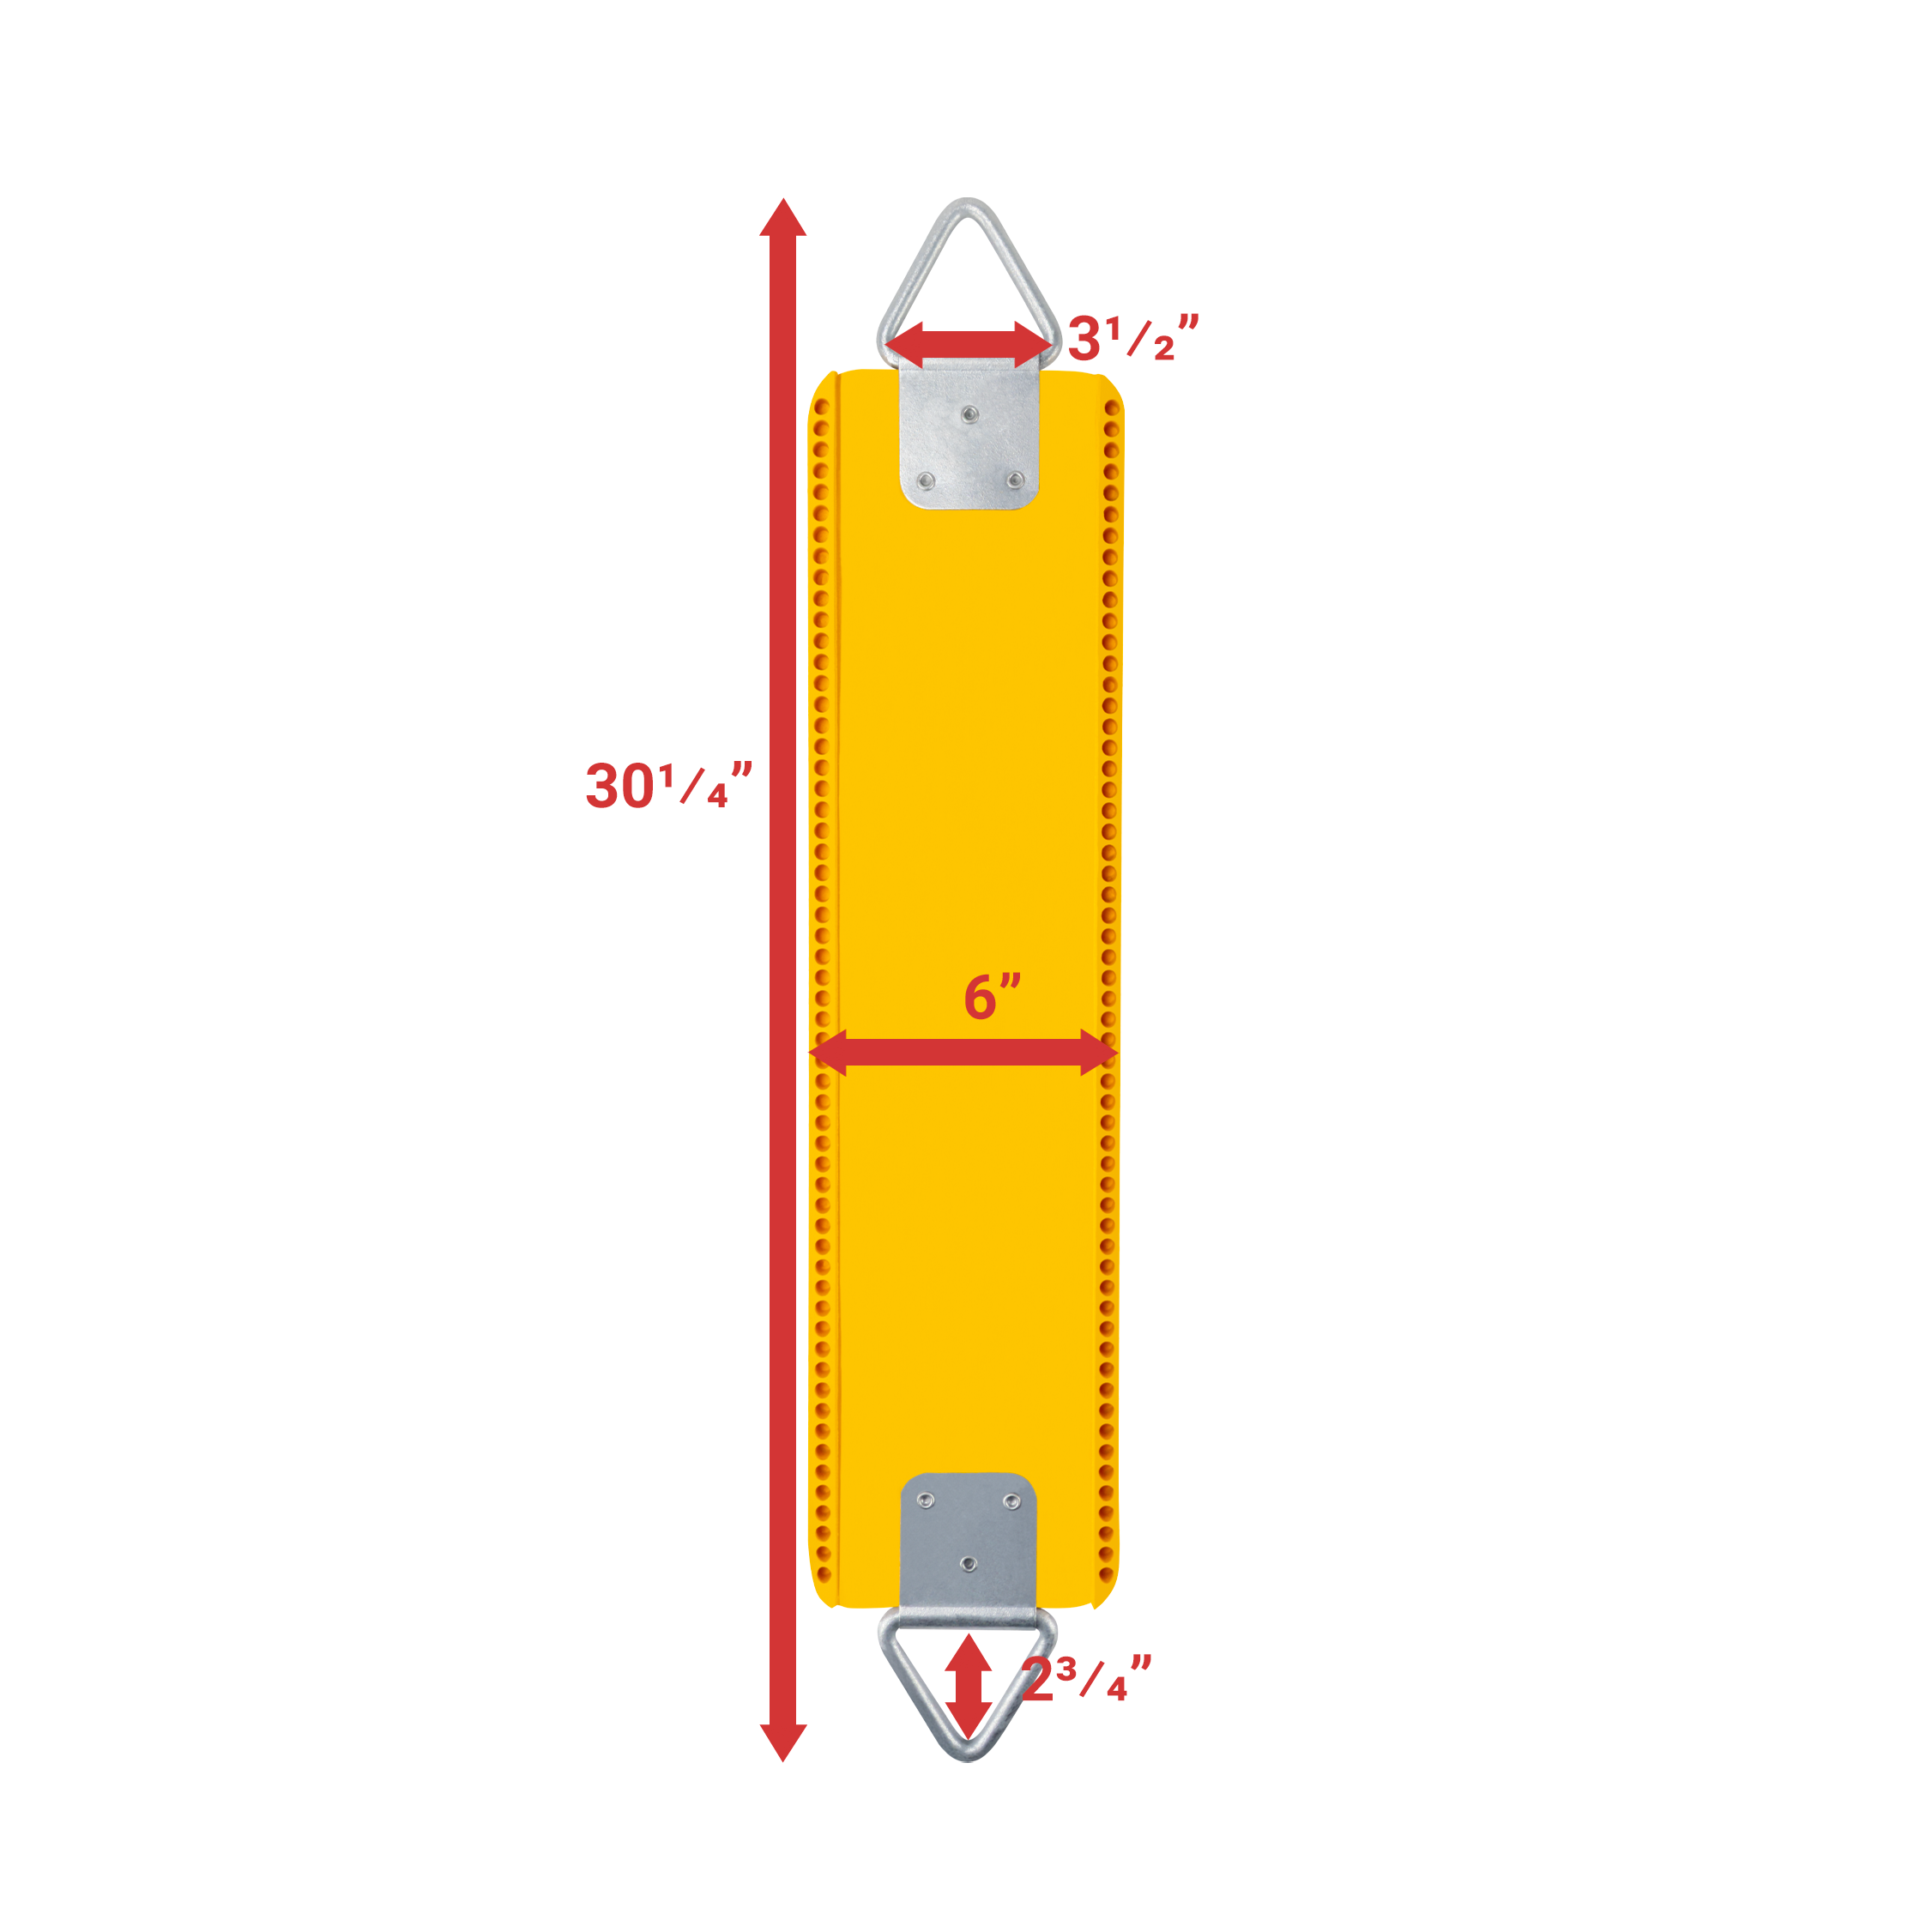 An image showing an s115 yellow and dimensions.